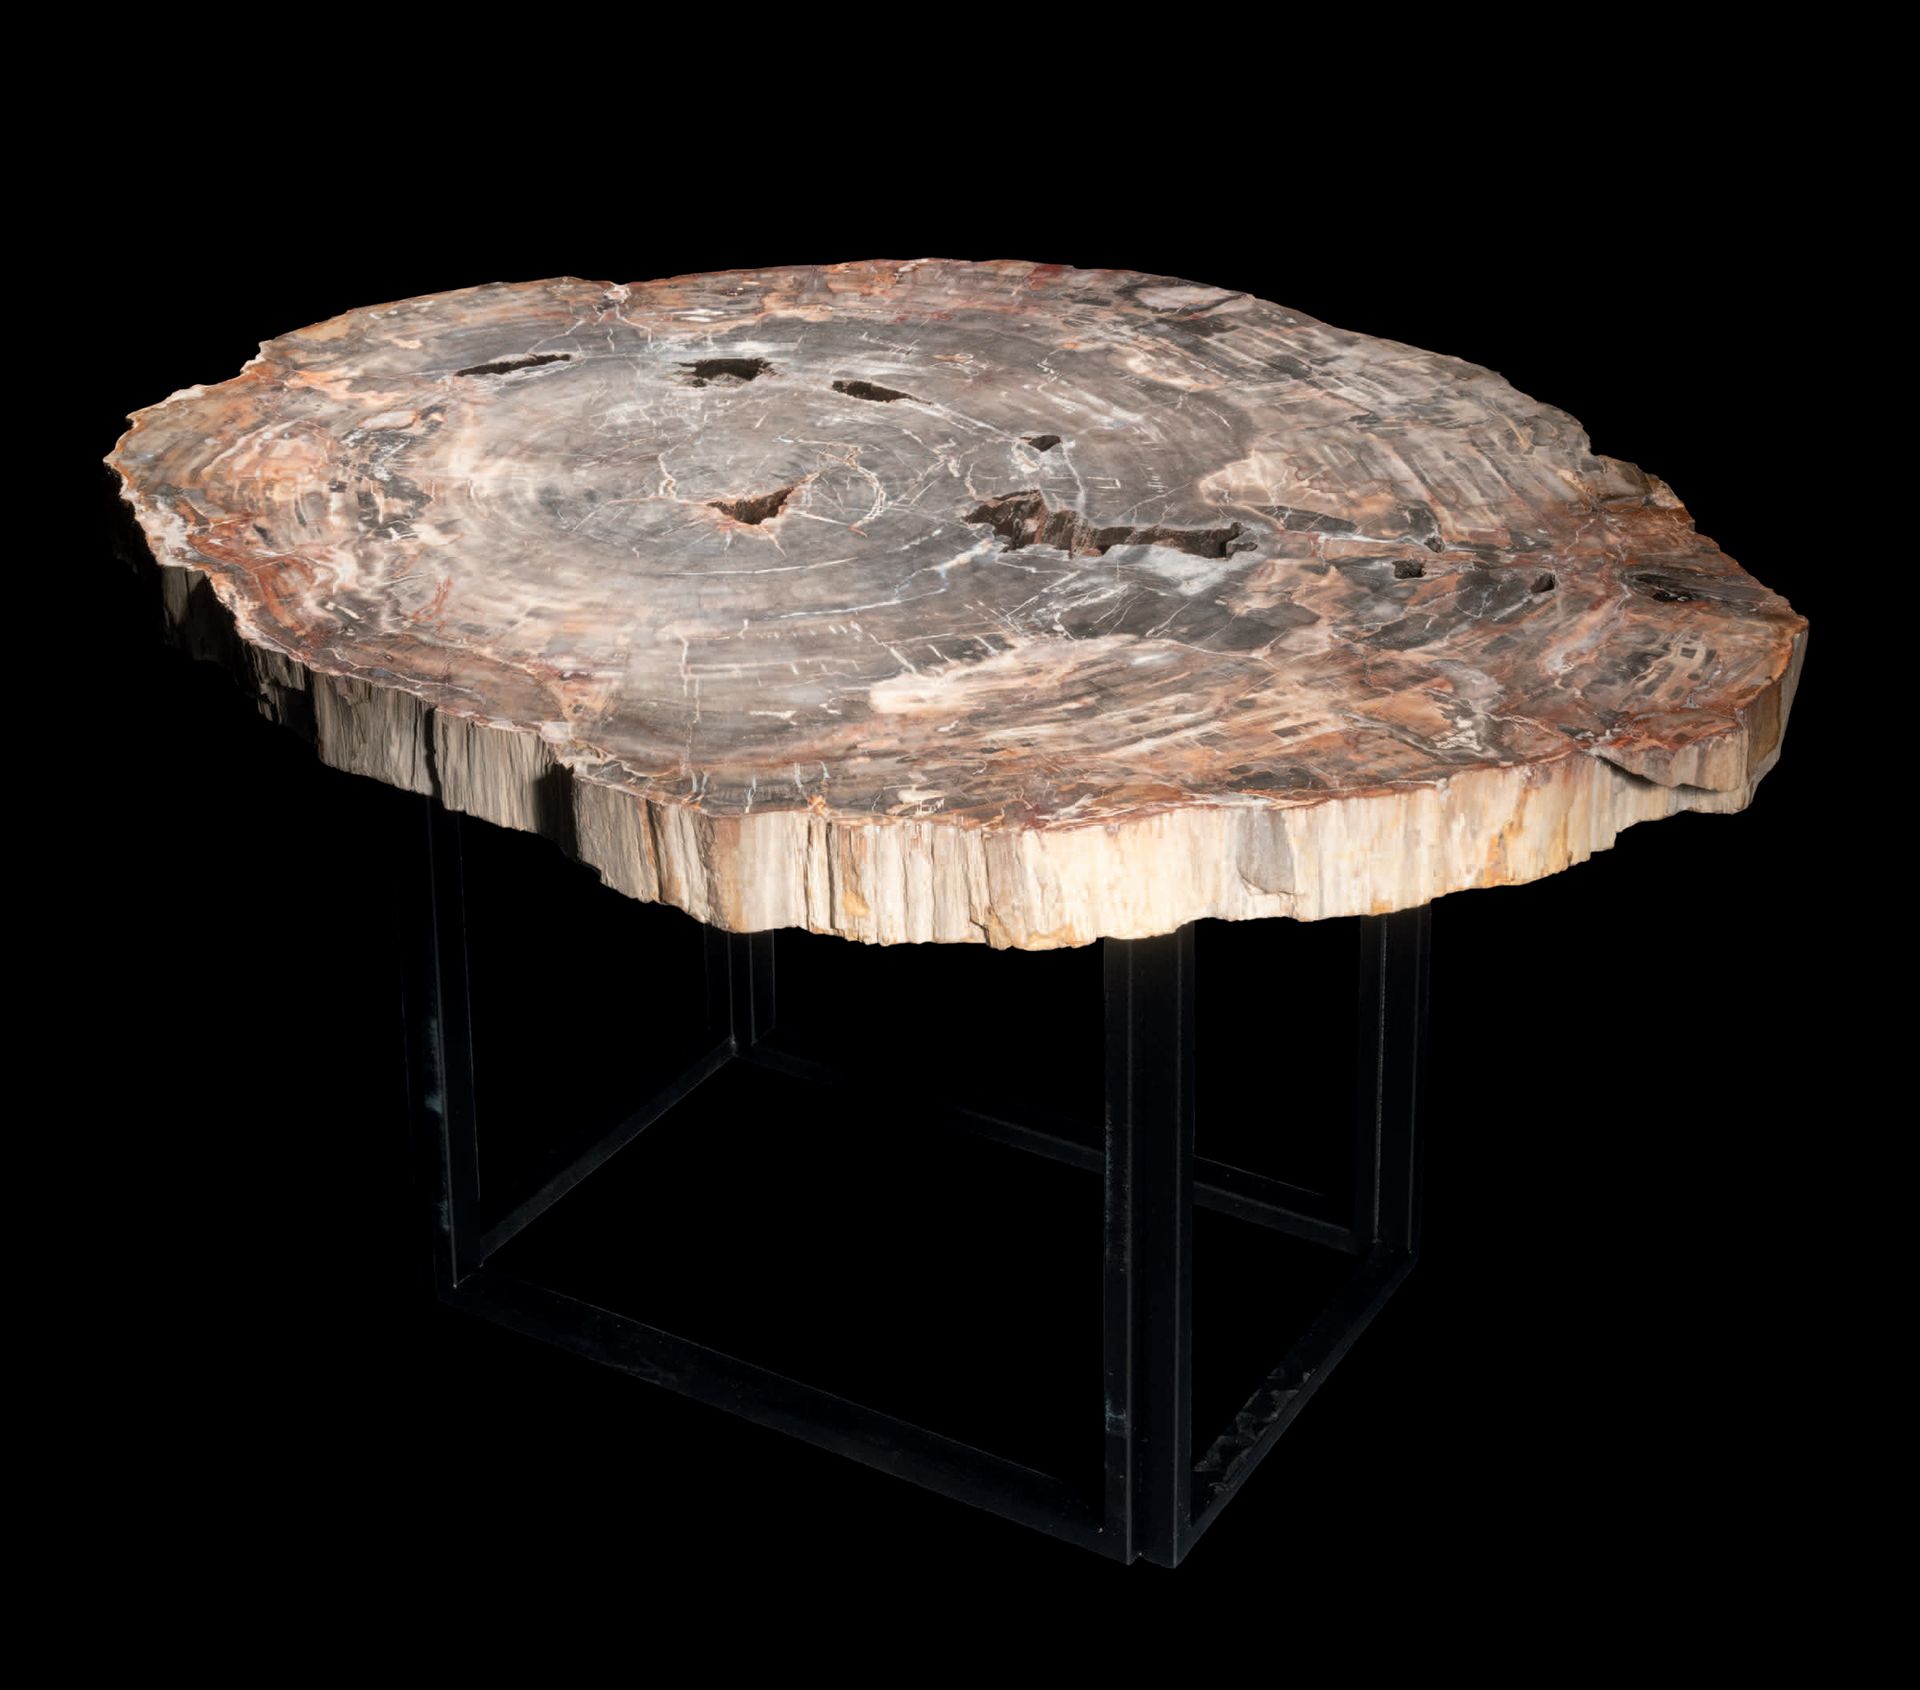 Null Giant fossil wood coffee table with metal structure
Late Triassic
Madagasca&hellip;